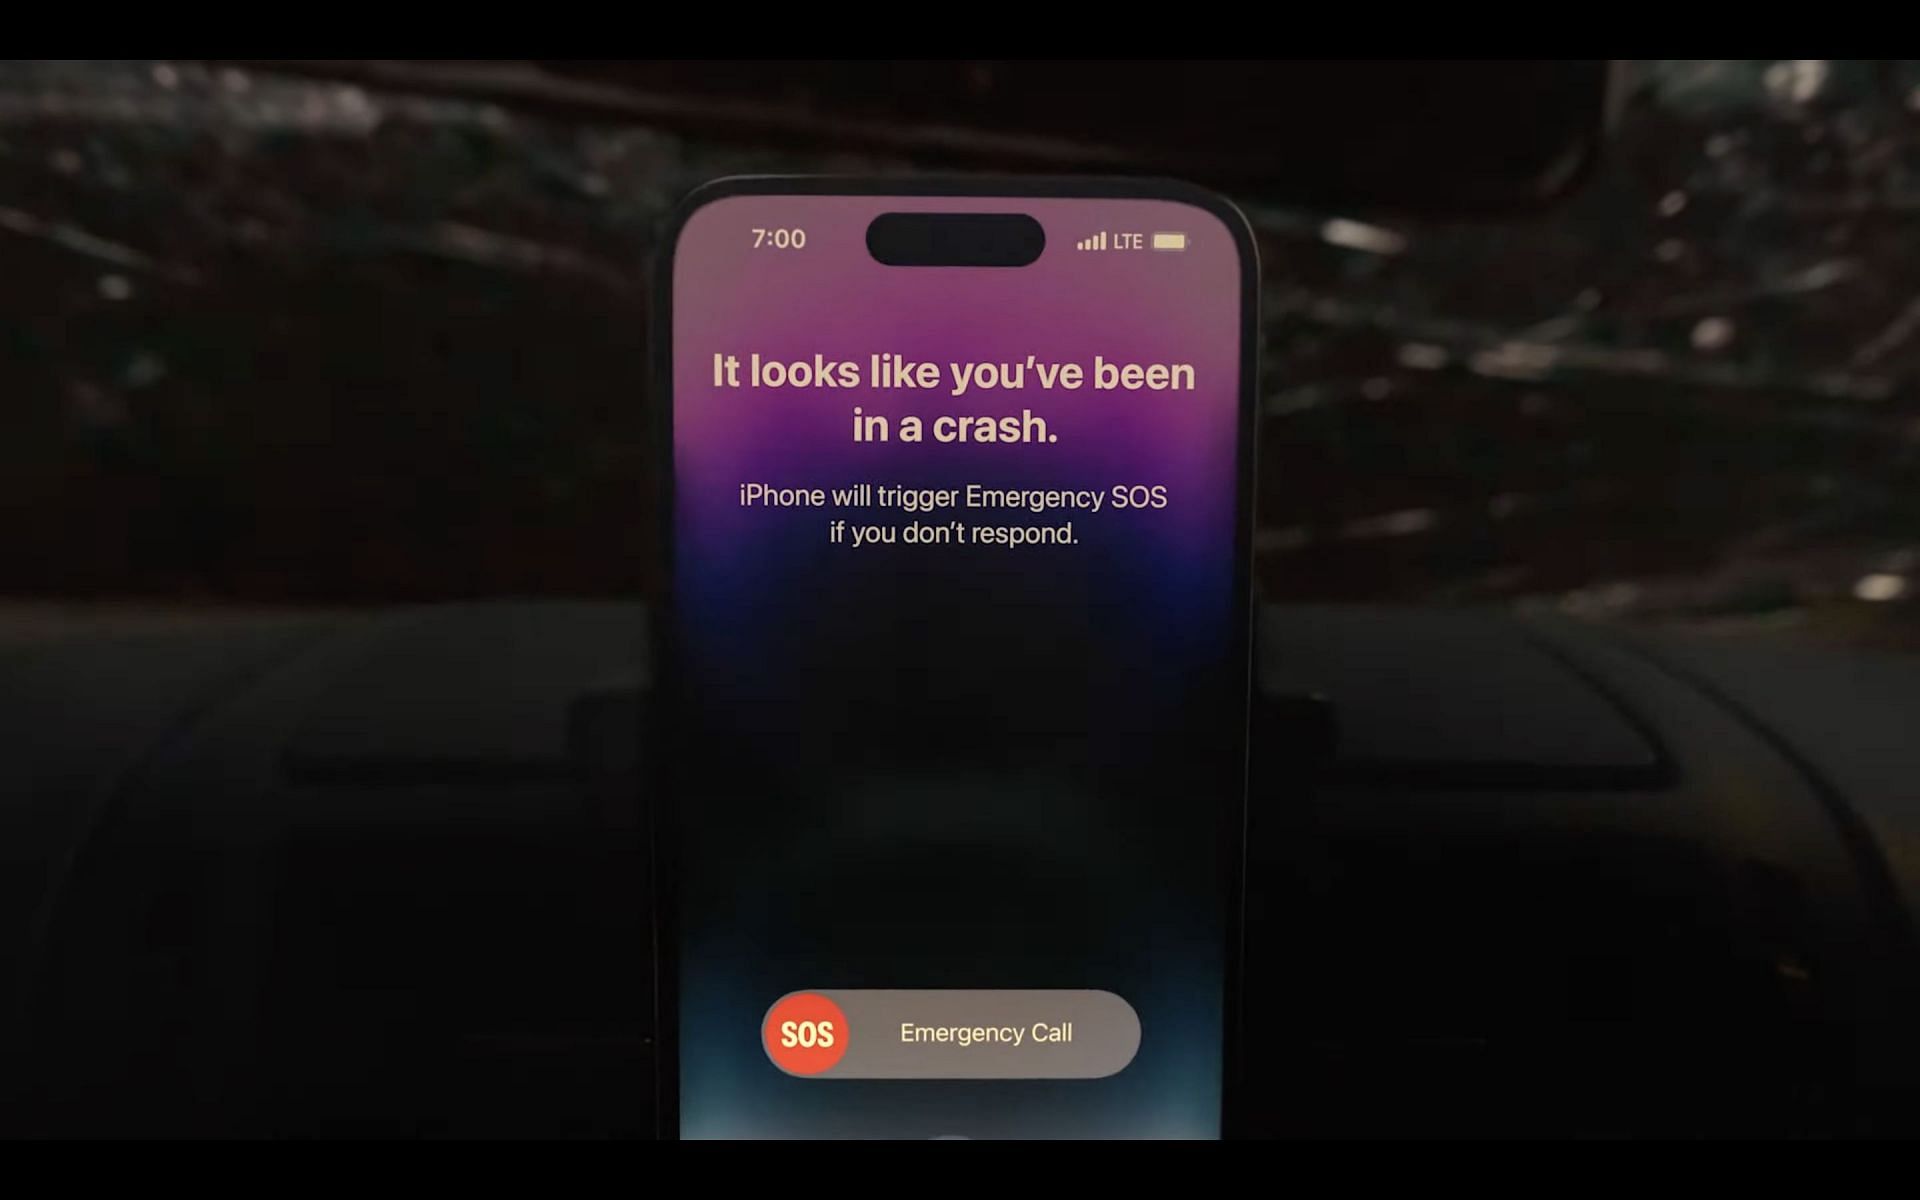 Emergency services will be called automatically after a crash (Image via Apple)